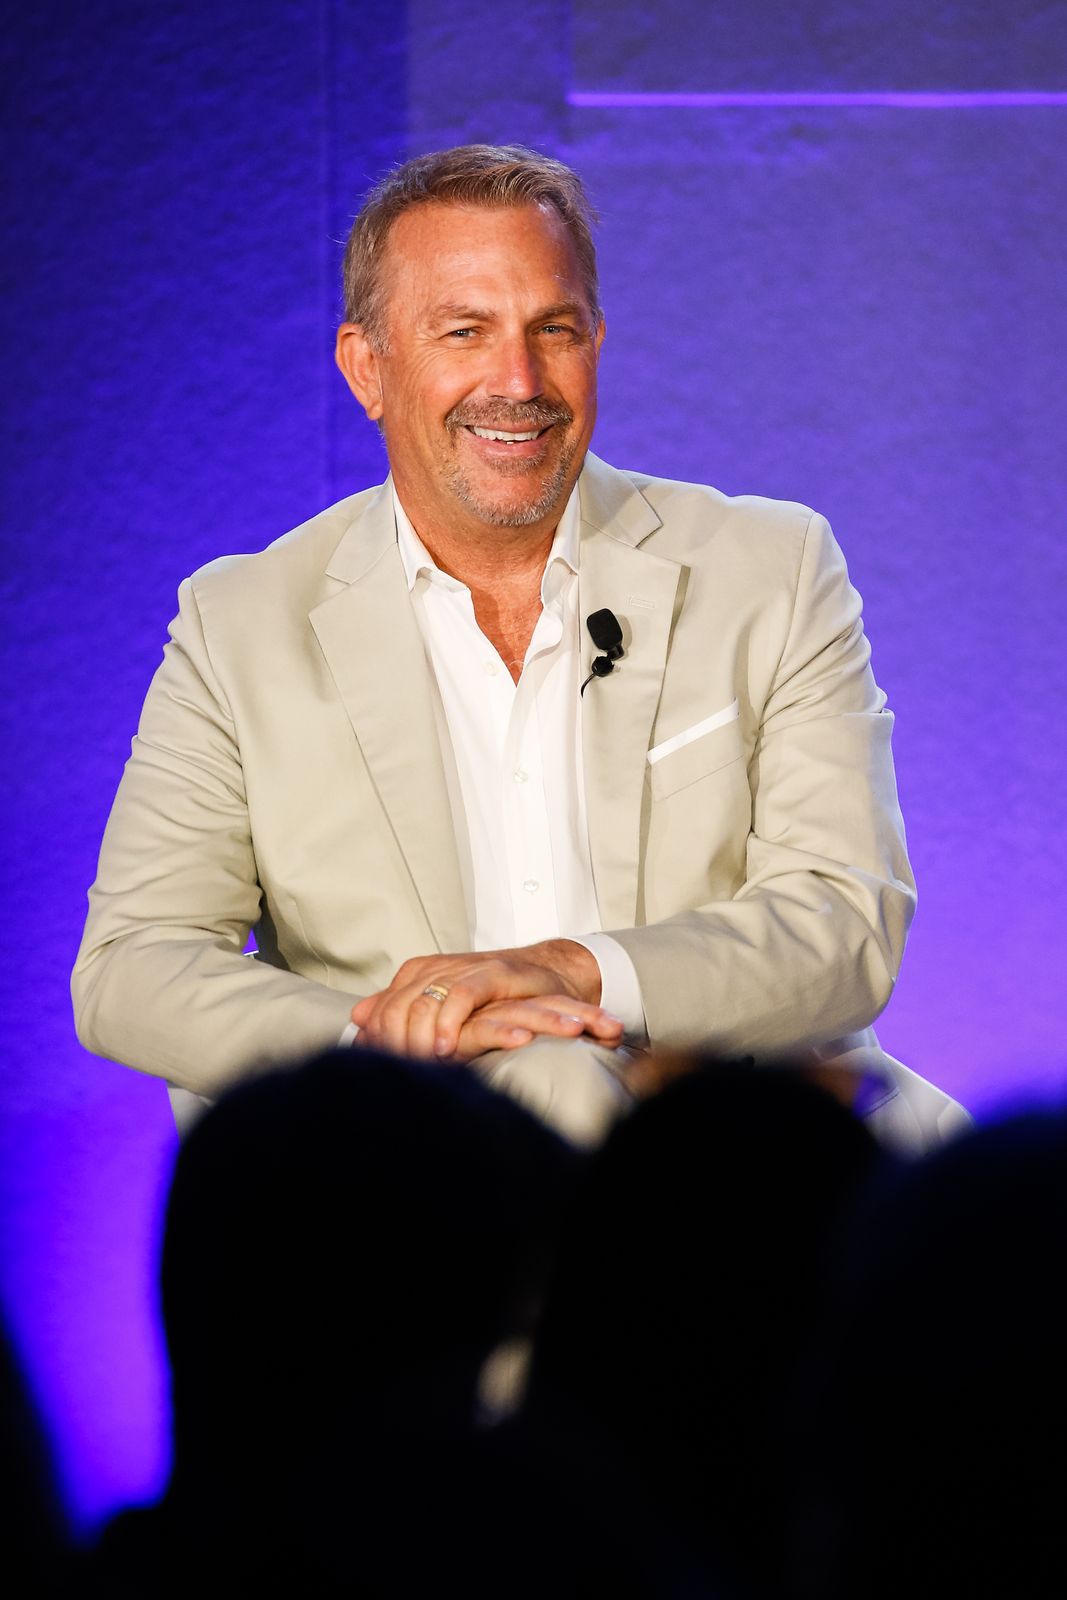 Kevin Costner during "A conversation with Kevin Costner from Paramount Network and Yellowstone" at the Cannes Lions Festival on June 21, 2018 | Photo: Getty Images